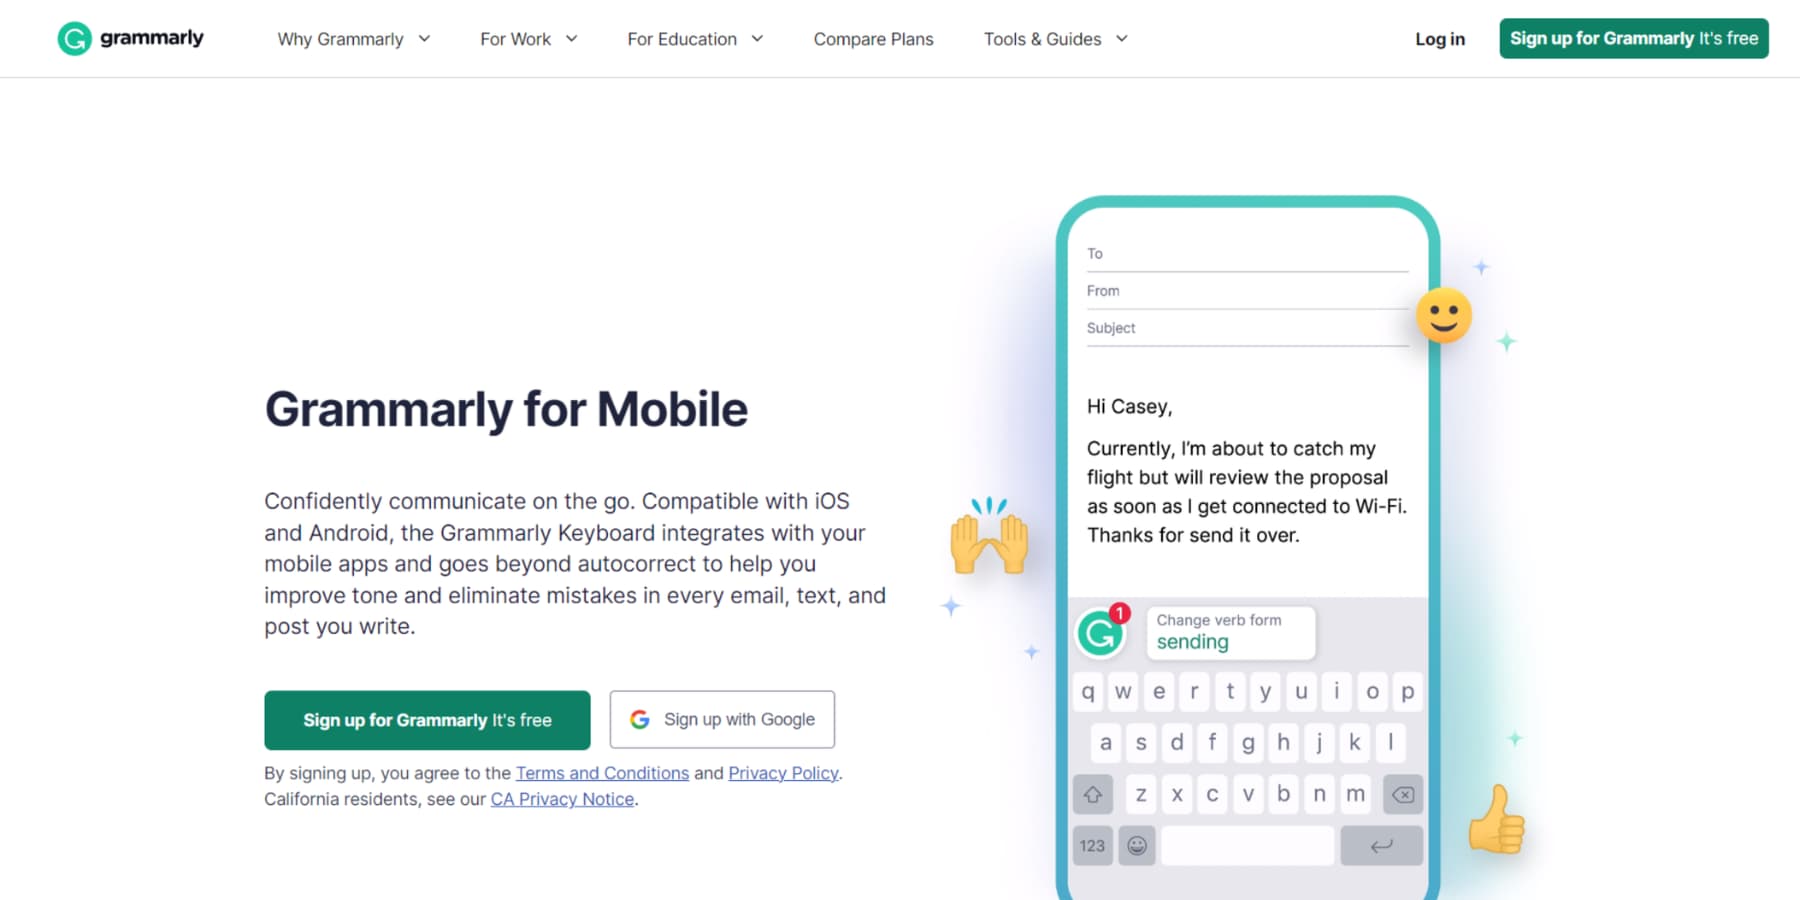 A screenshot of Grammarly mobile app's homepage